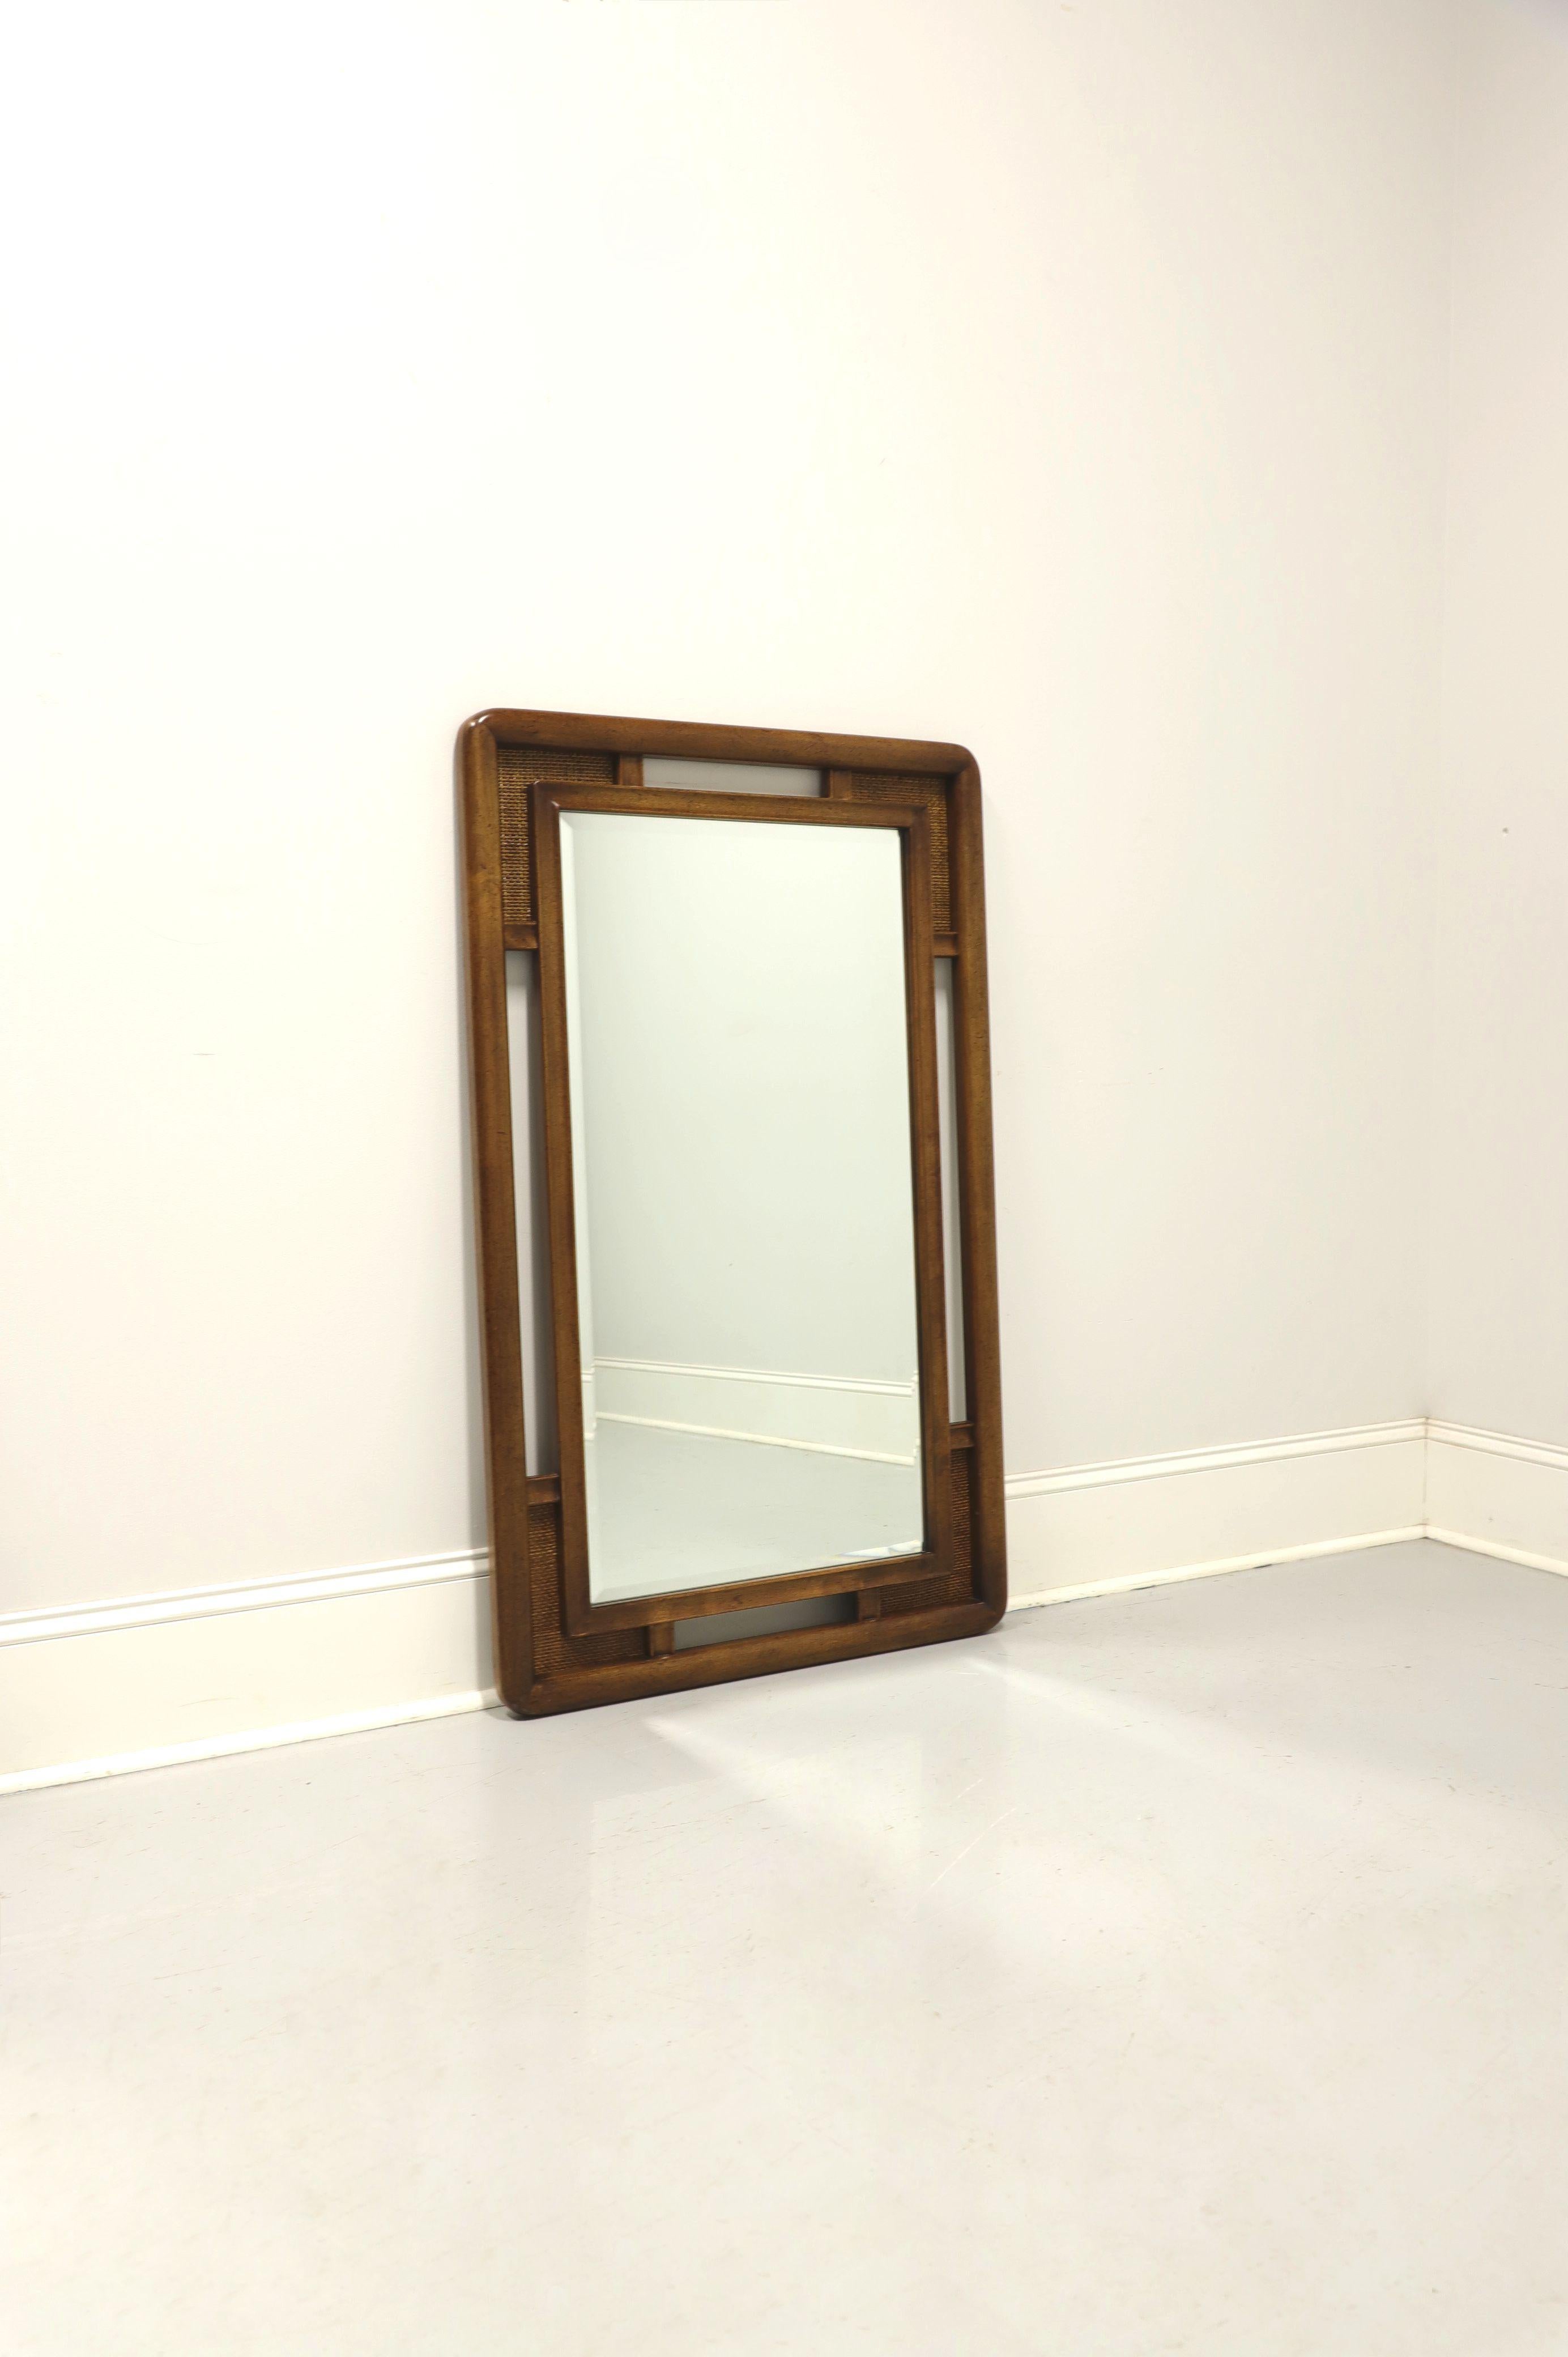 An Asian Style dresser or wall mirror by Unique Furniture. Beveled mirror glass in a nutwood frame with slightly distressed finish and decorative cane accents to the four corners. Made in Winston-Salem, North Carolina, USA, in the mid 20th Century.